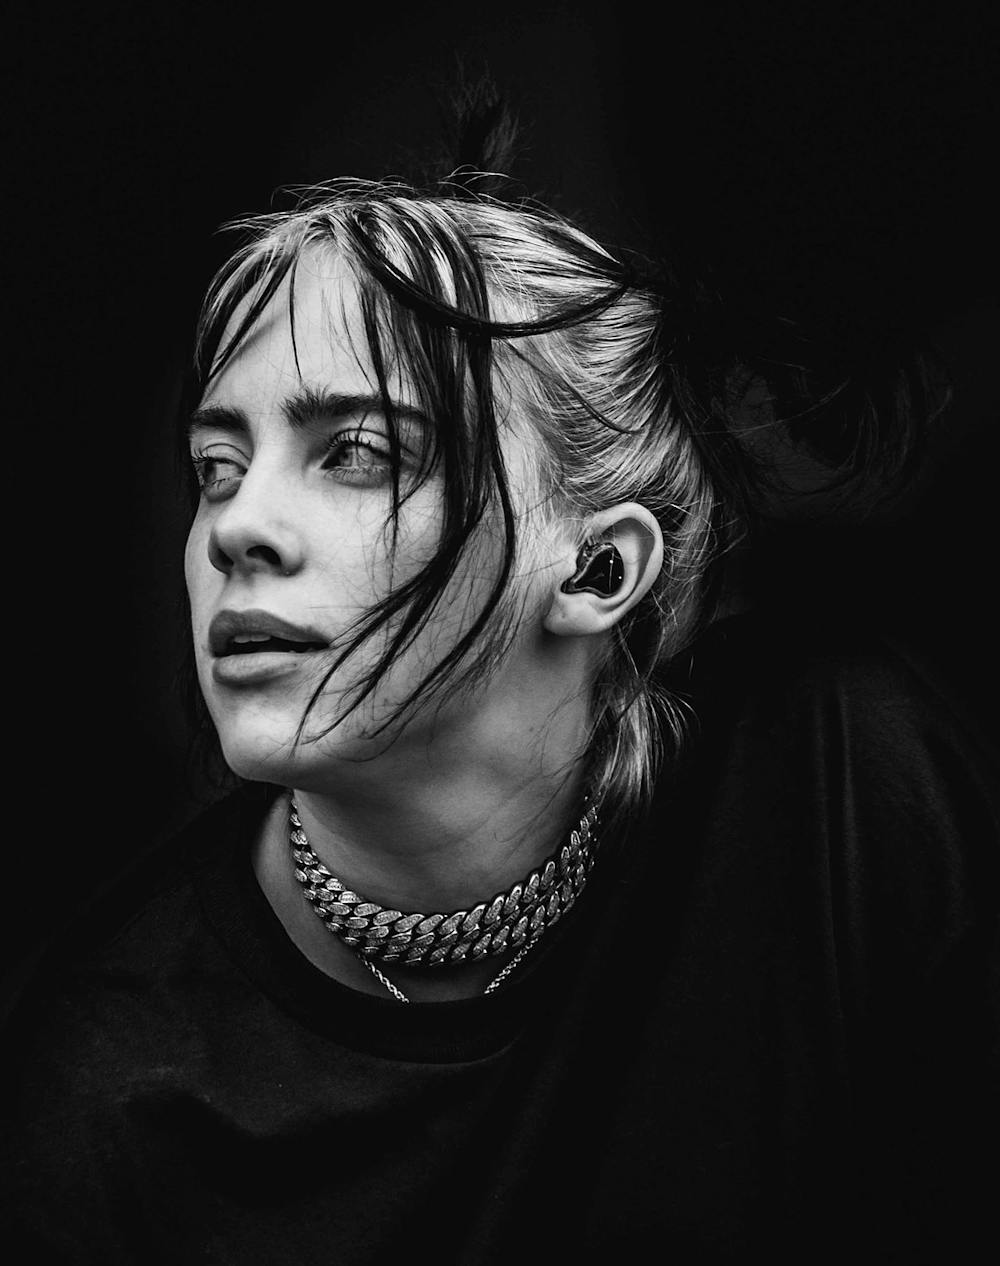 Singer-songwriter Billie Eilish was only 13 years old when she first heard her music played on the radio.